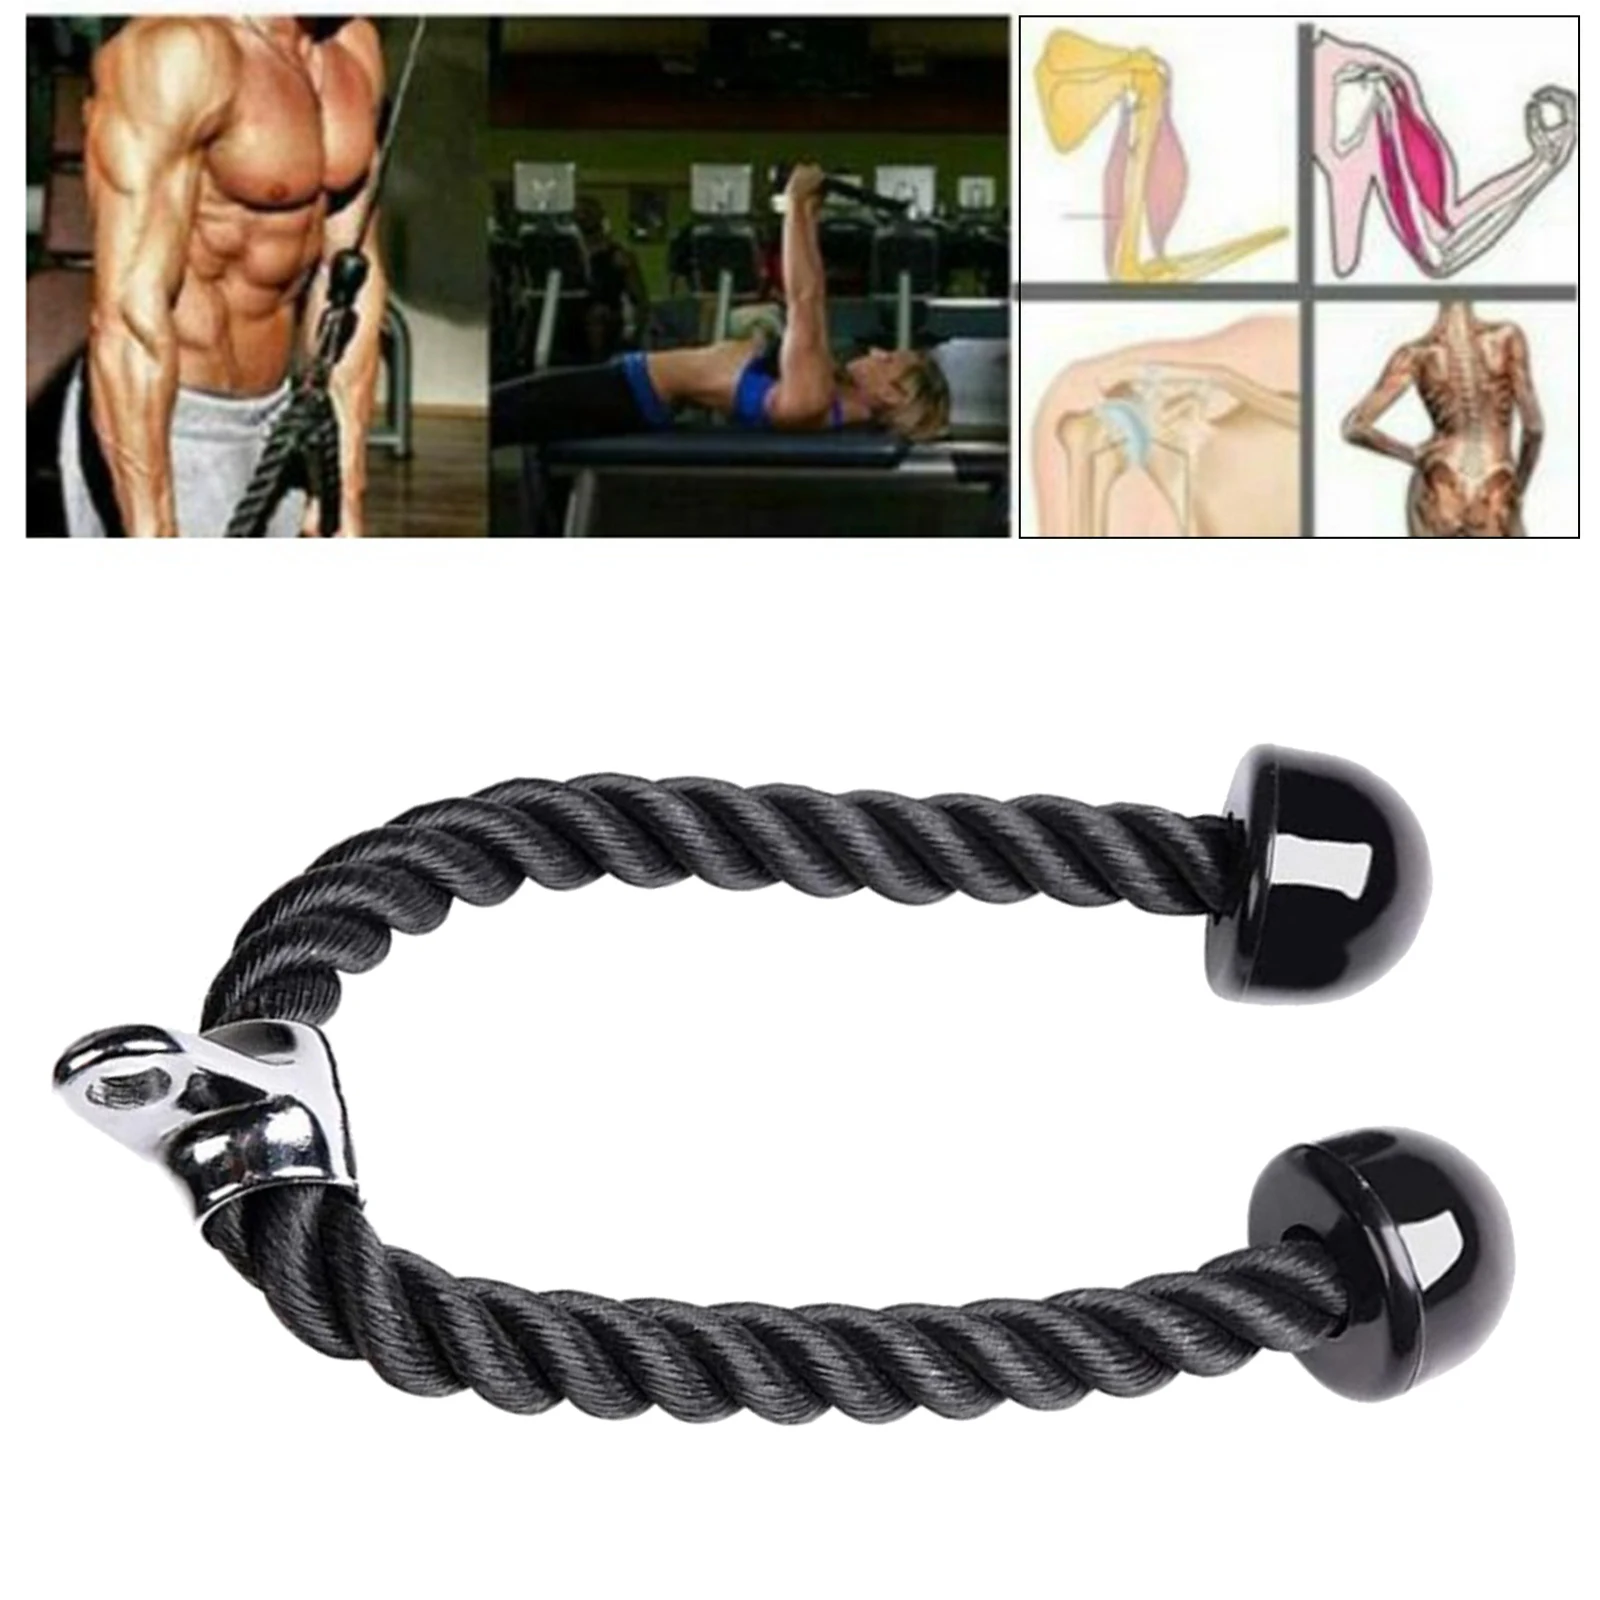 70cm Solid Fitness Triceps Rope Multi Gym Cable Attachment Press Push Pull Down Arm Exercise Equipment Attachment